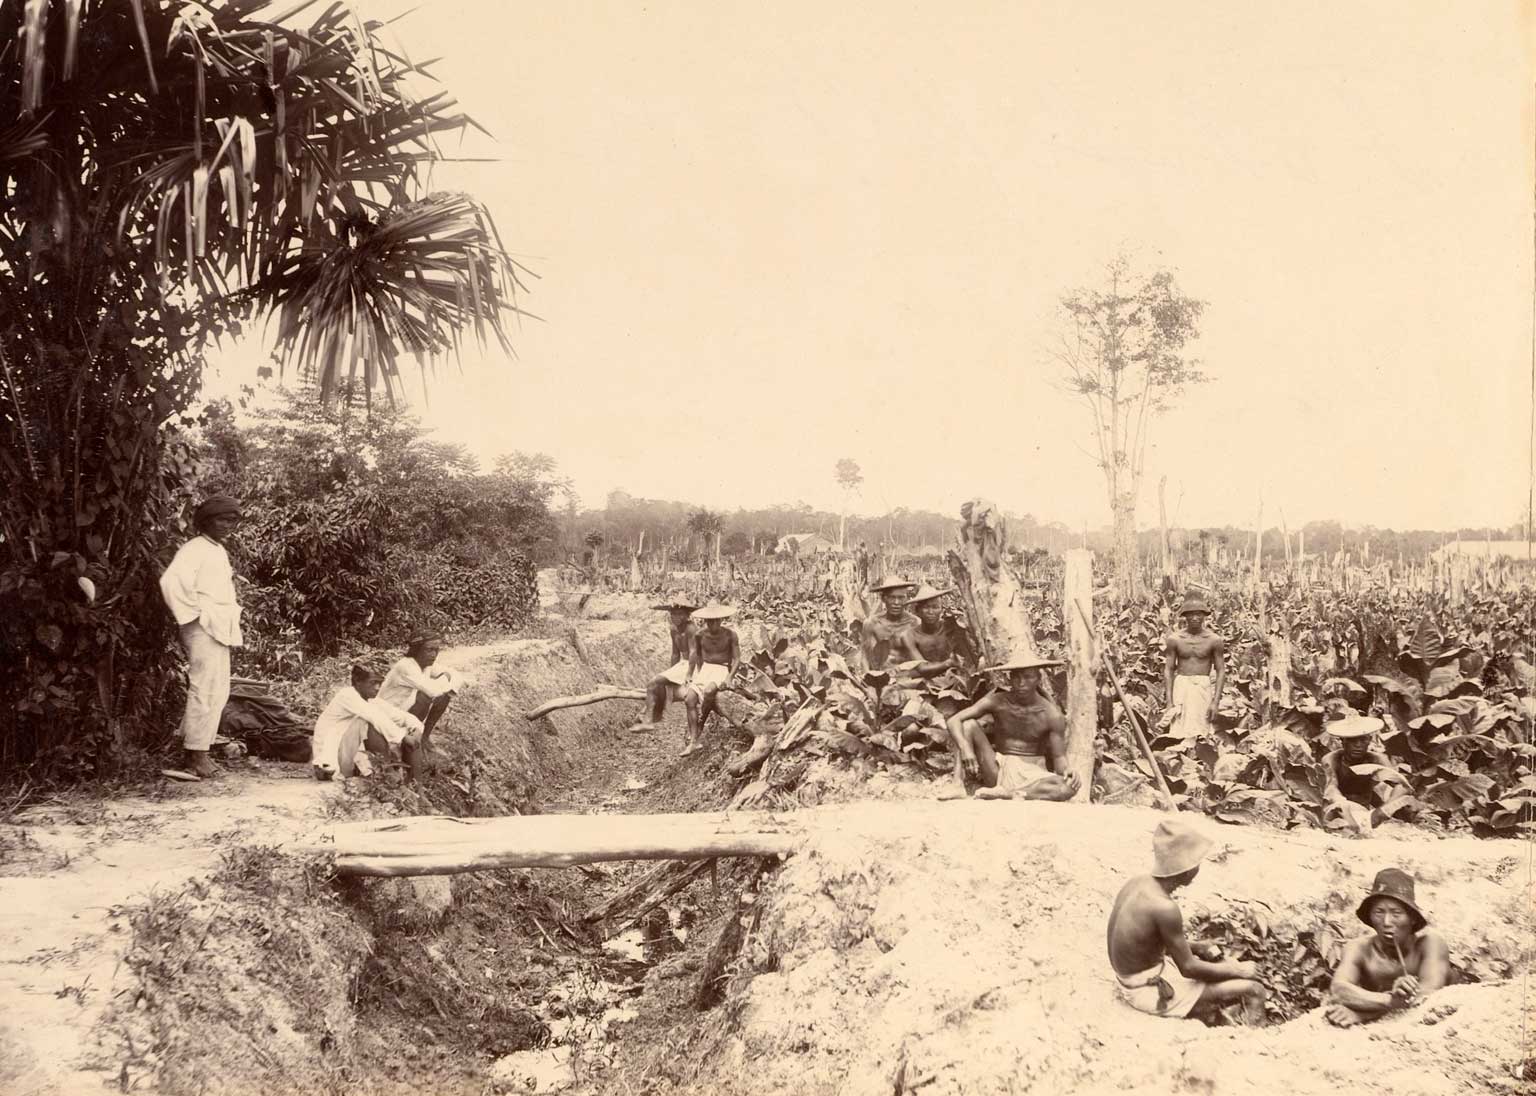 Coolies on a tobacco plantation in Sumatra, between 1890 and 1900